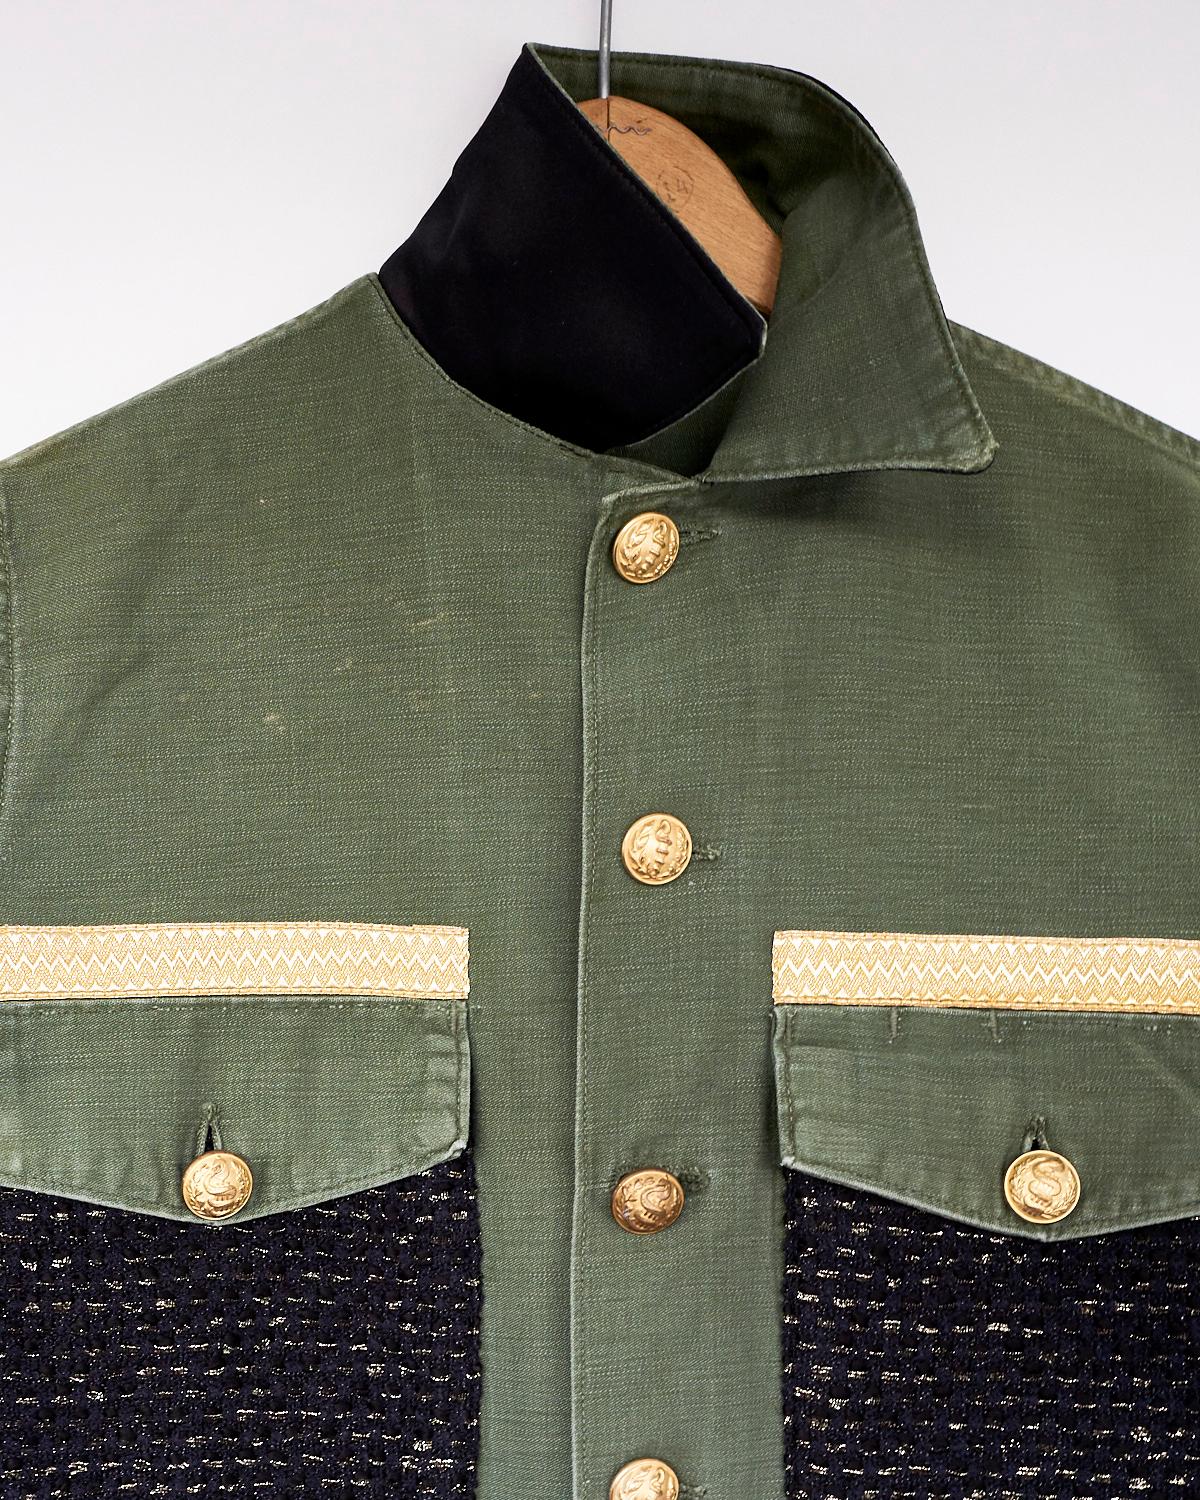 Embellished Jacket Green Military Black Gold Lurex Tweed Gold Buttons J Dauphin
Upcycled Vinatge, Sustainable Luxury

Our Up-cycled Vintage Jackets are made from vintage, natural fibers, military clothing and french workwear from the period